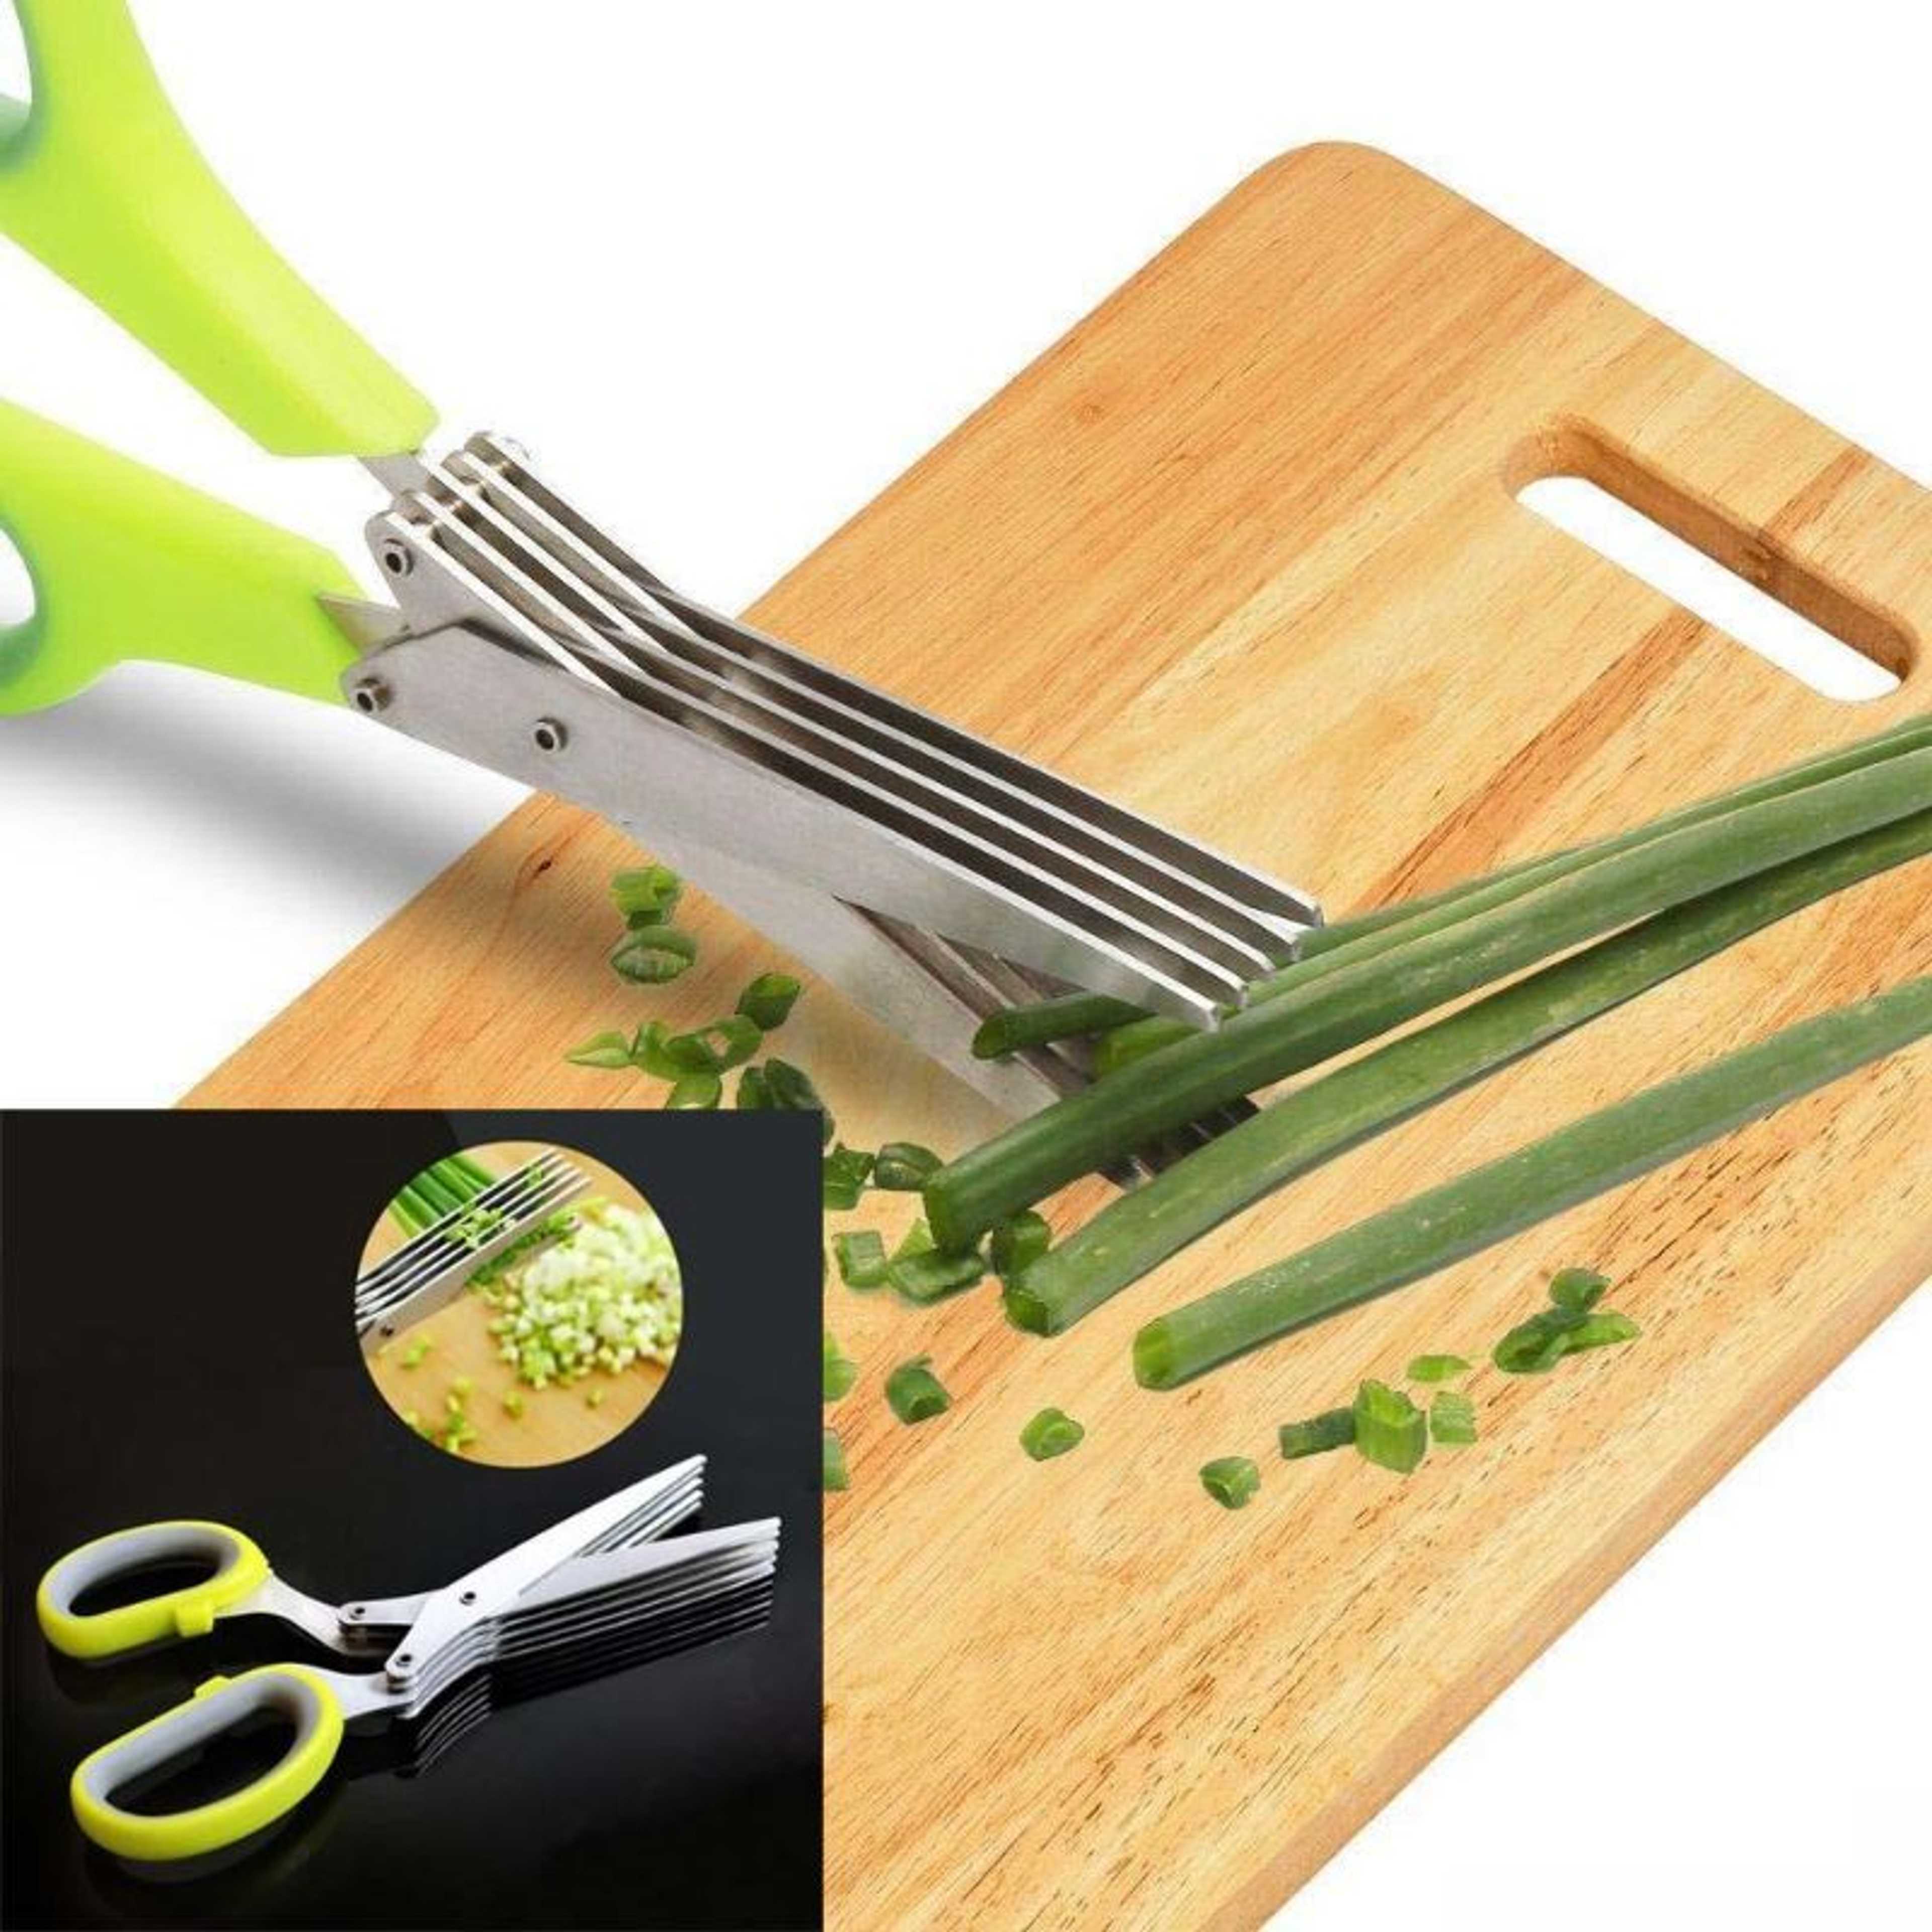 Stainless Steel 5 Layers Kitchen Scissor & Wood Cutting Board